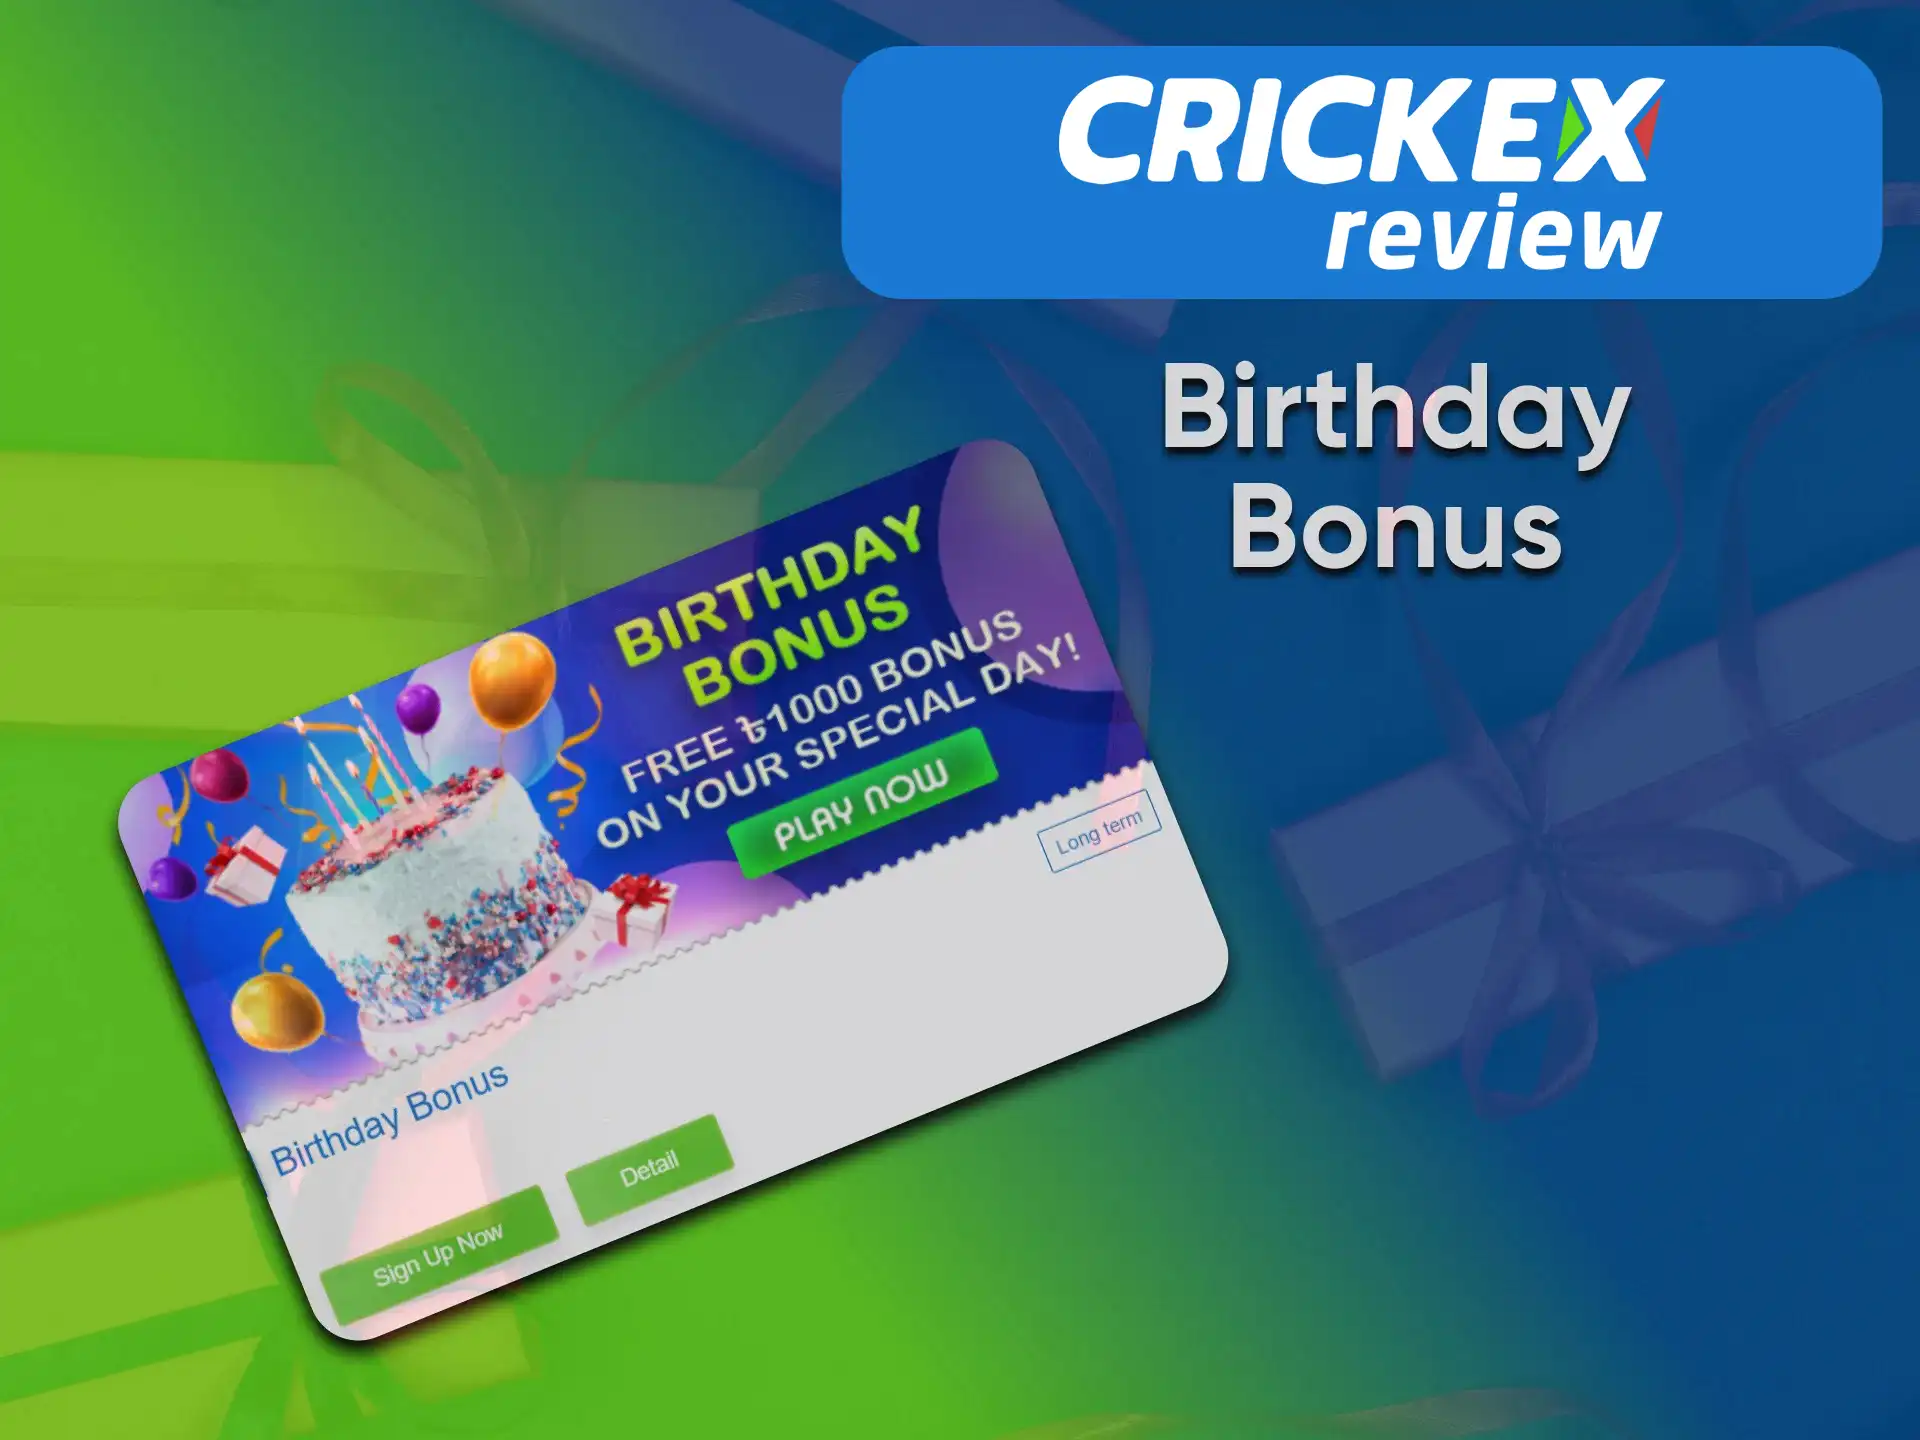 Crickex gives bonuses on the birthdays of its users.